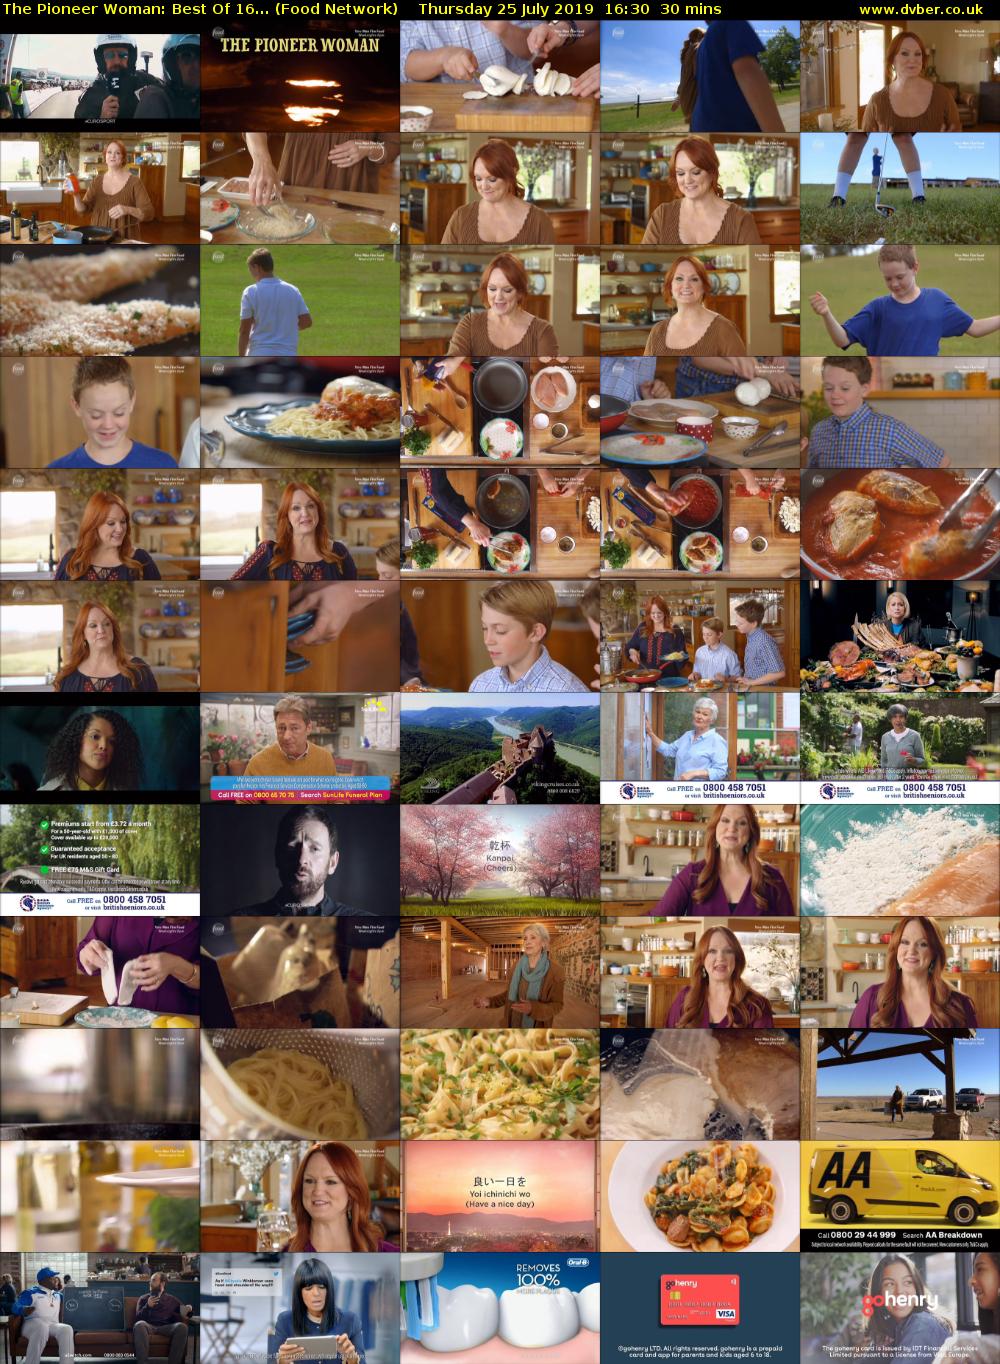 The Pioneer Woman: Best Of 16... (Food Network) Thursday 25 July 2019 16:30 - 17:00